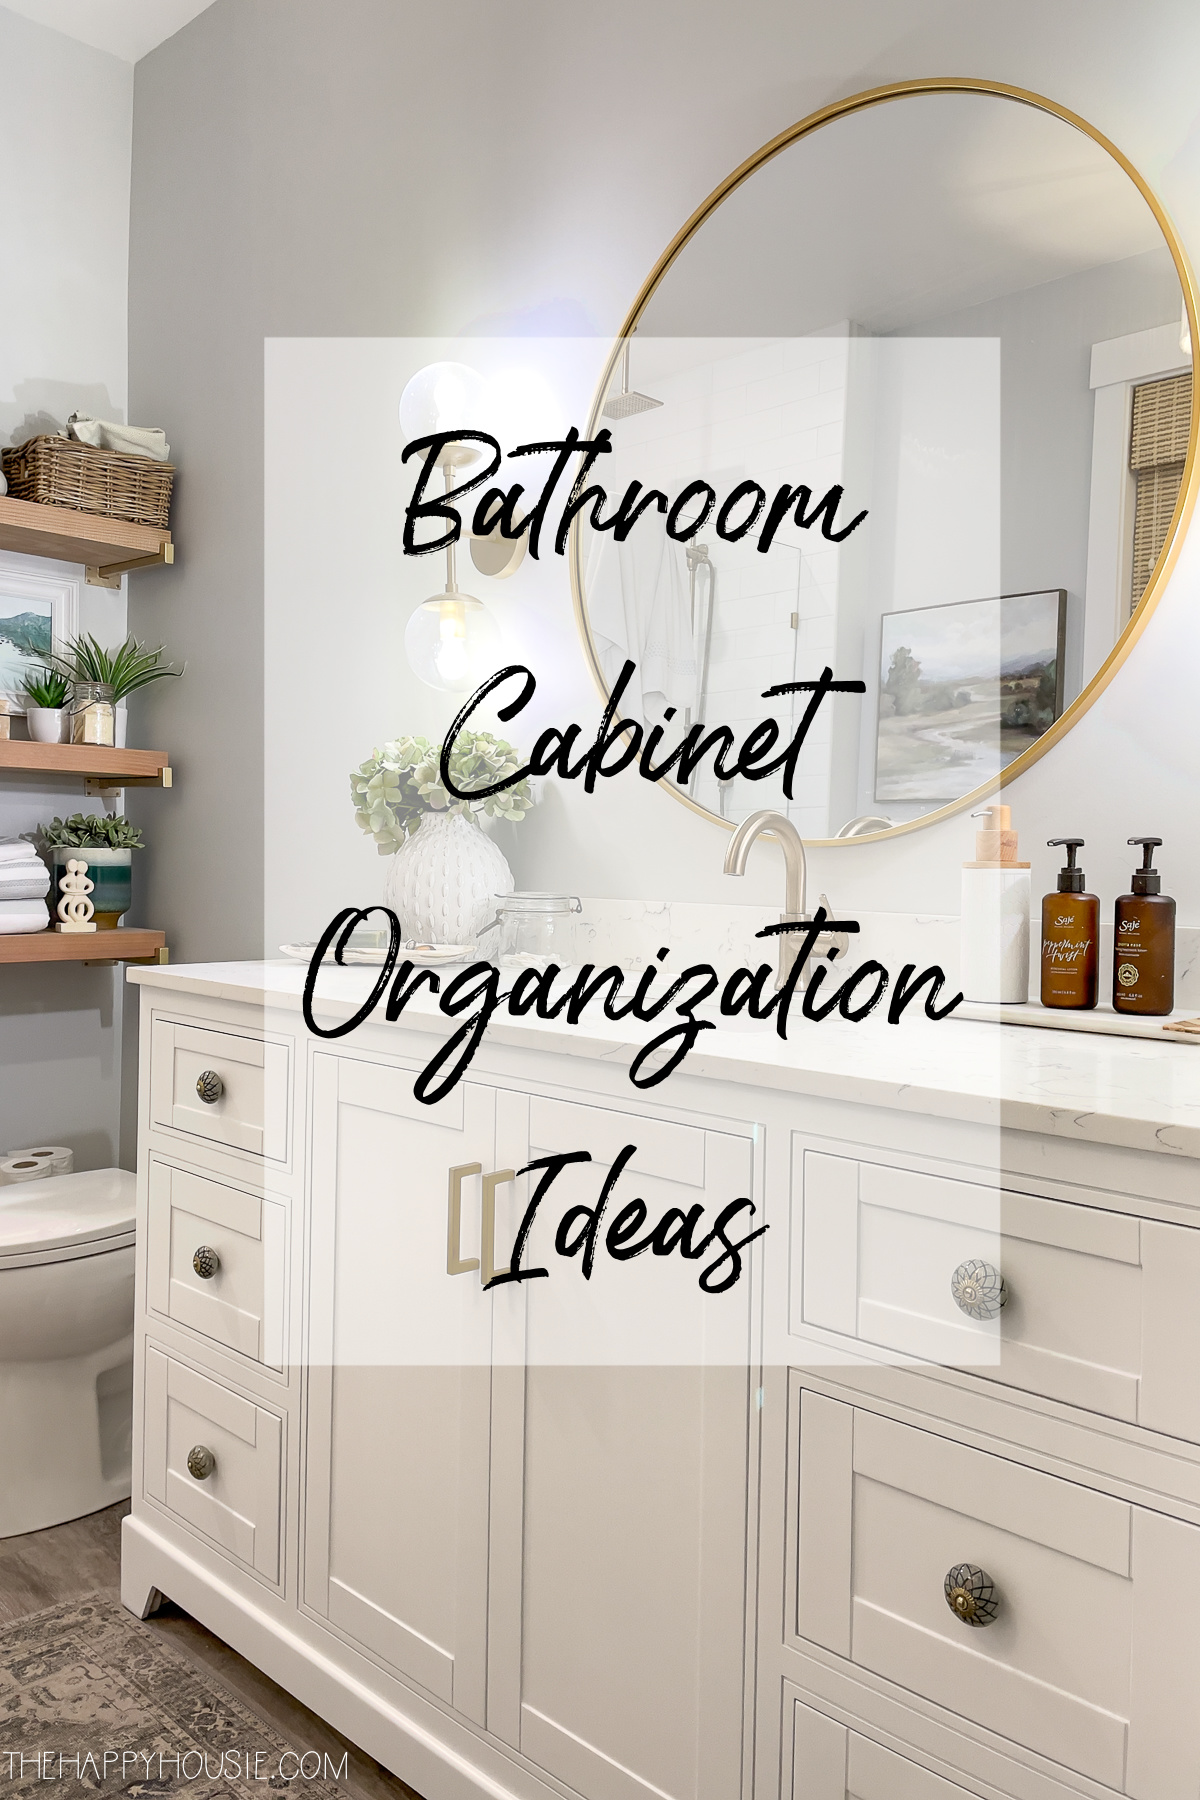 https://www.thehappyhousie.com/wp-content/uploads/2022/01/bathroom-cabinet-organization-ideas-and-how-to-organize-your-bathroom.jpg